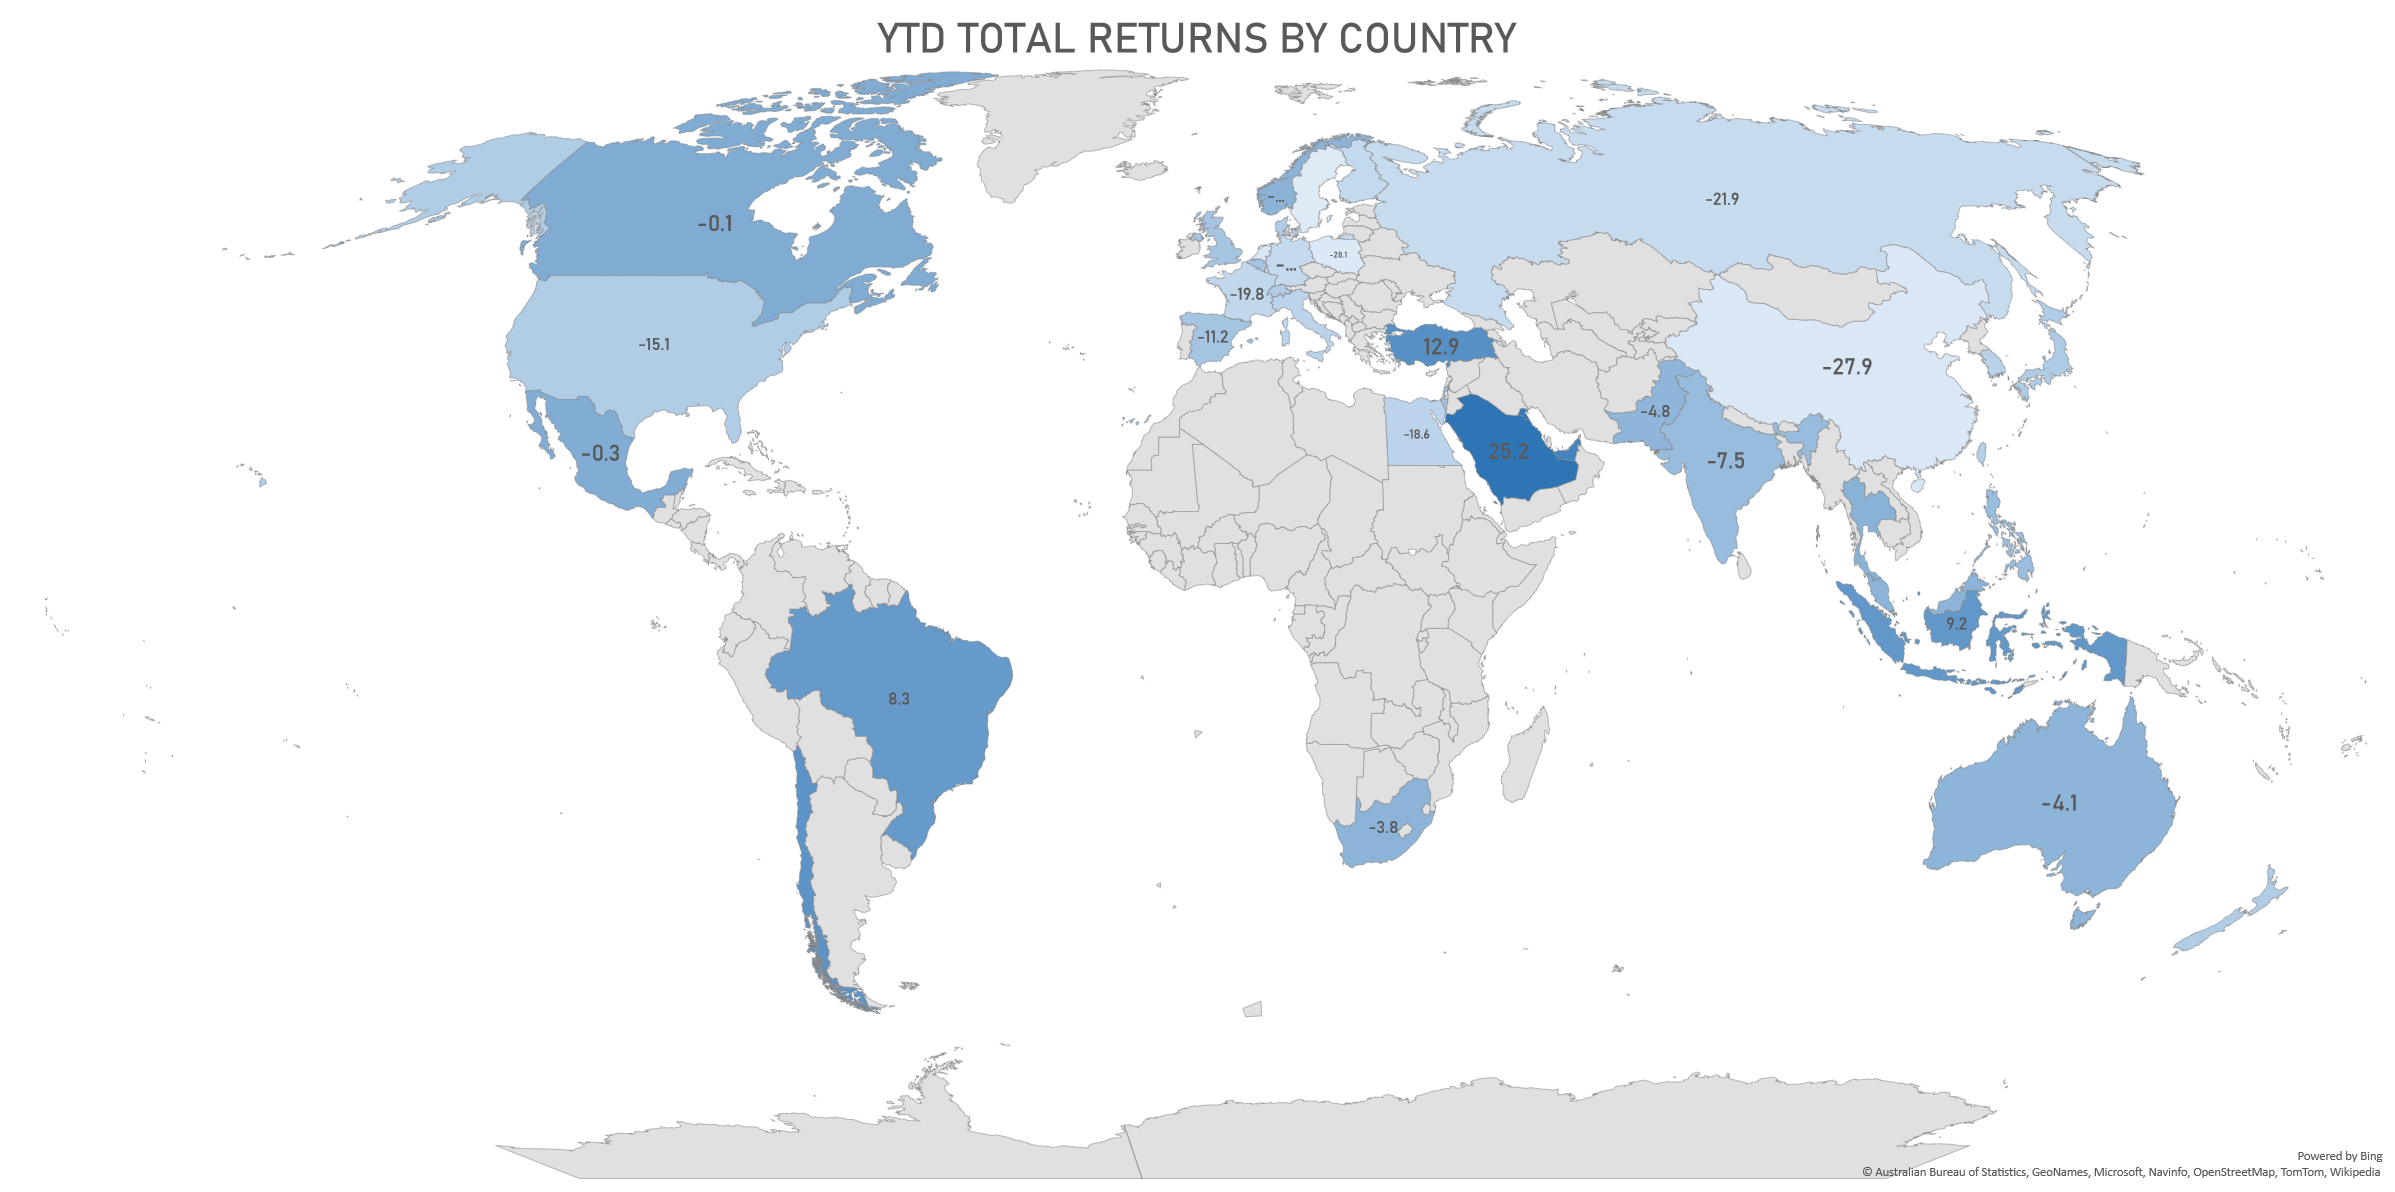 YTD Total Returns By Country | Sources: phipost.com, FactSet data